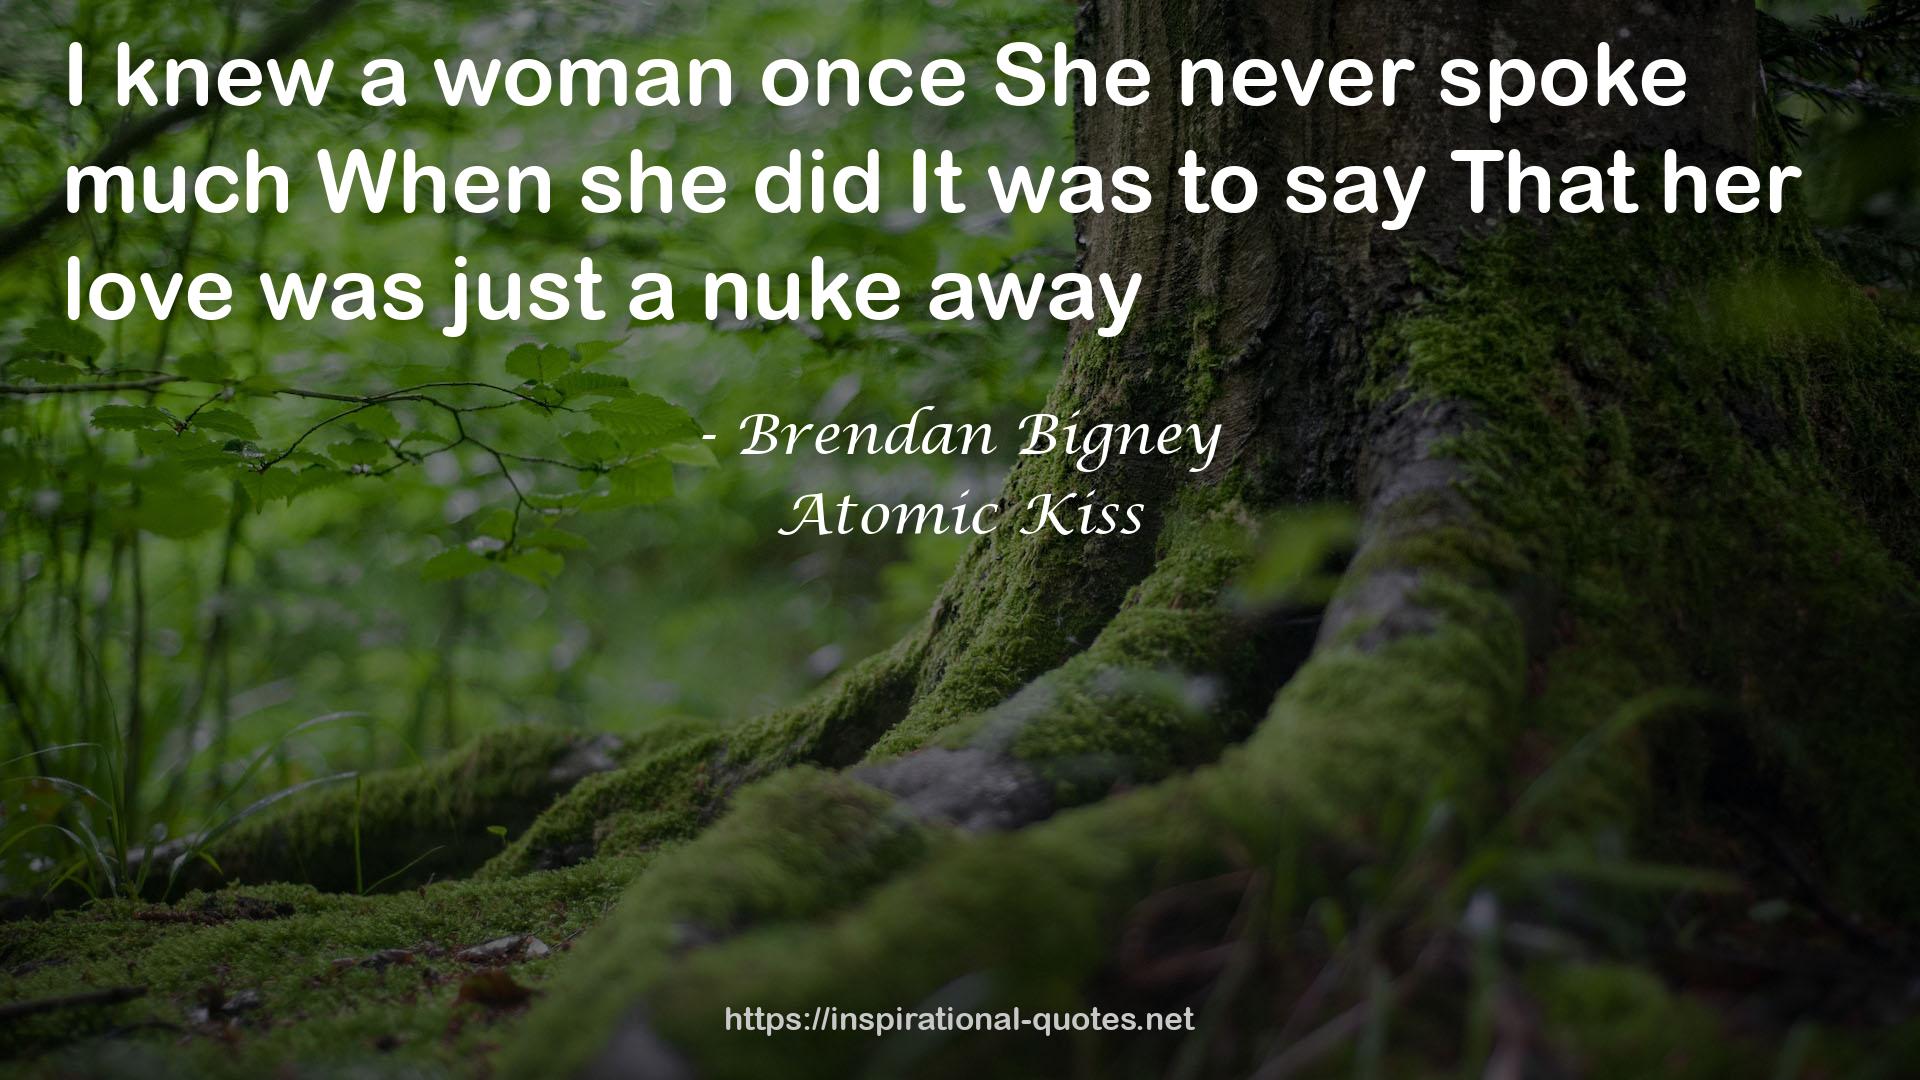 Atomic Kiss QUOTES